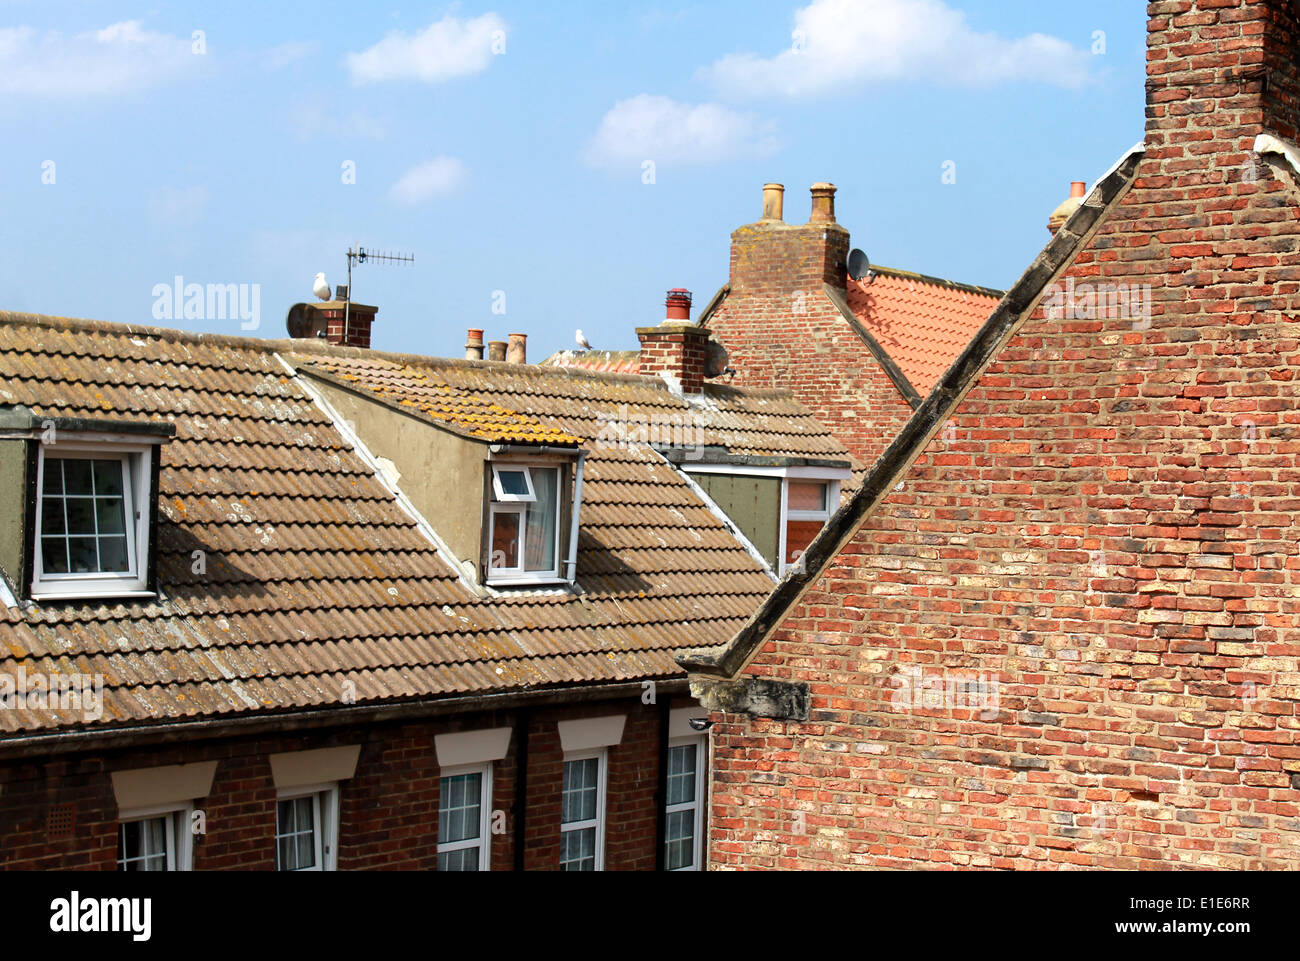 Tiled house rooftops in the town of Whitby, North Yorkshire, England. Stock Photo